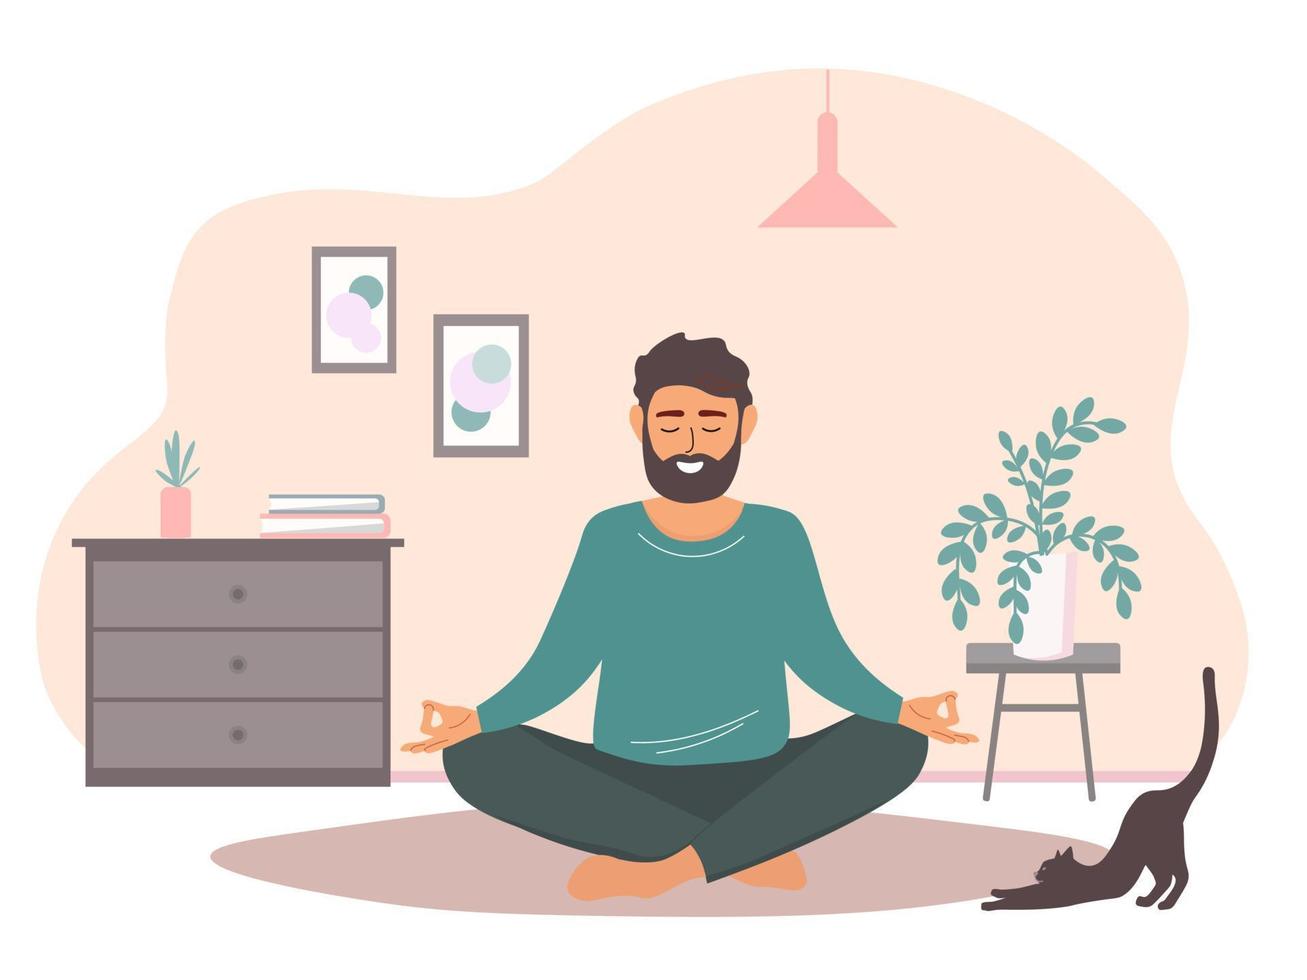 The guy is sitting in the lotus position in the room on the floor. A man does yoga asanas alone at home. Vector graphics.